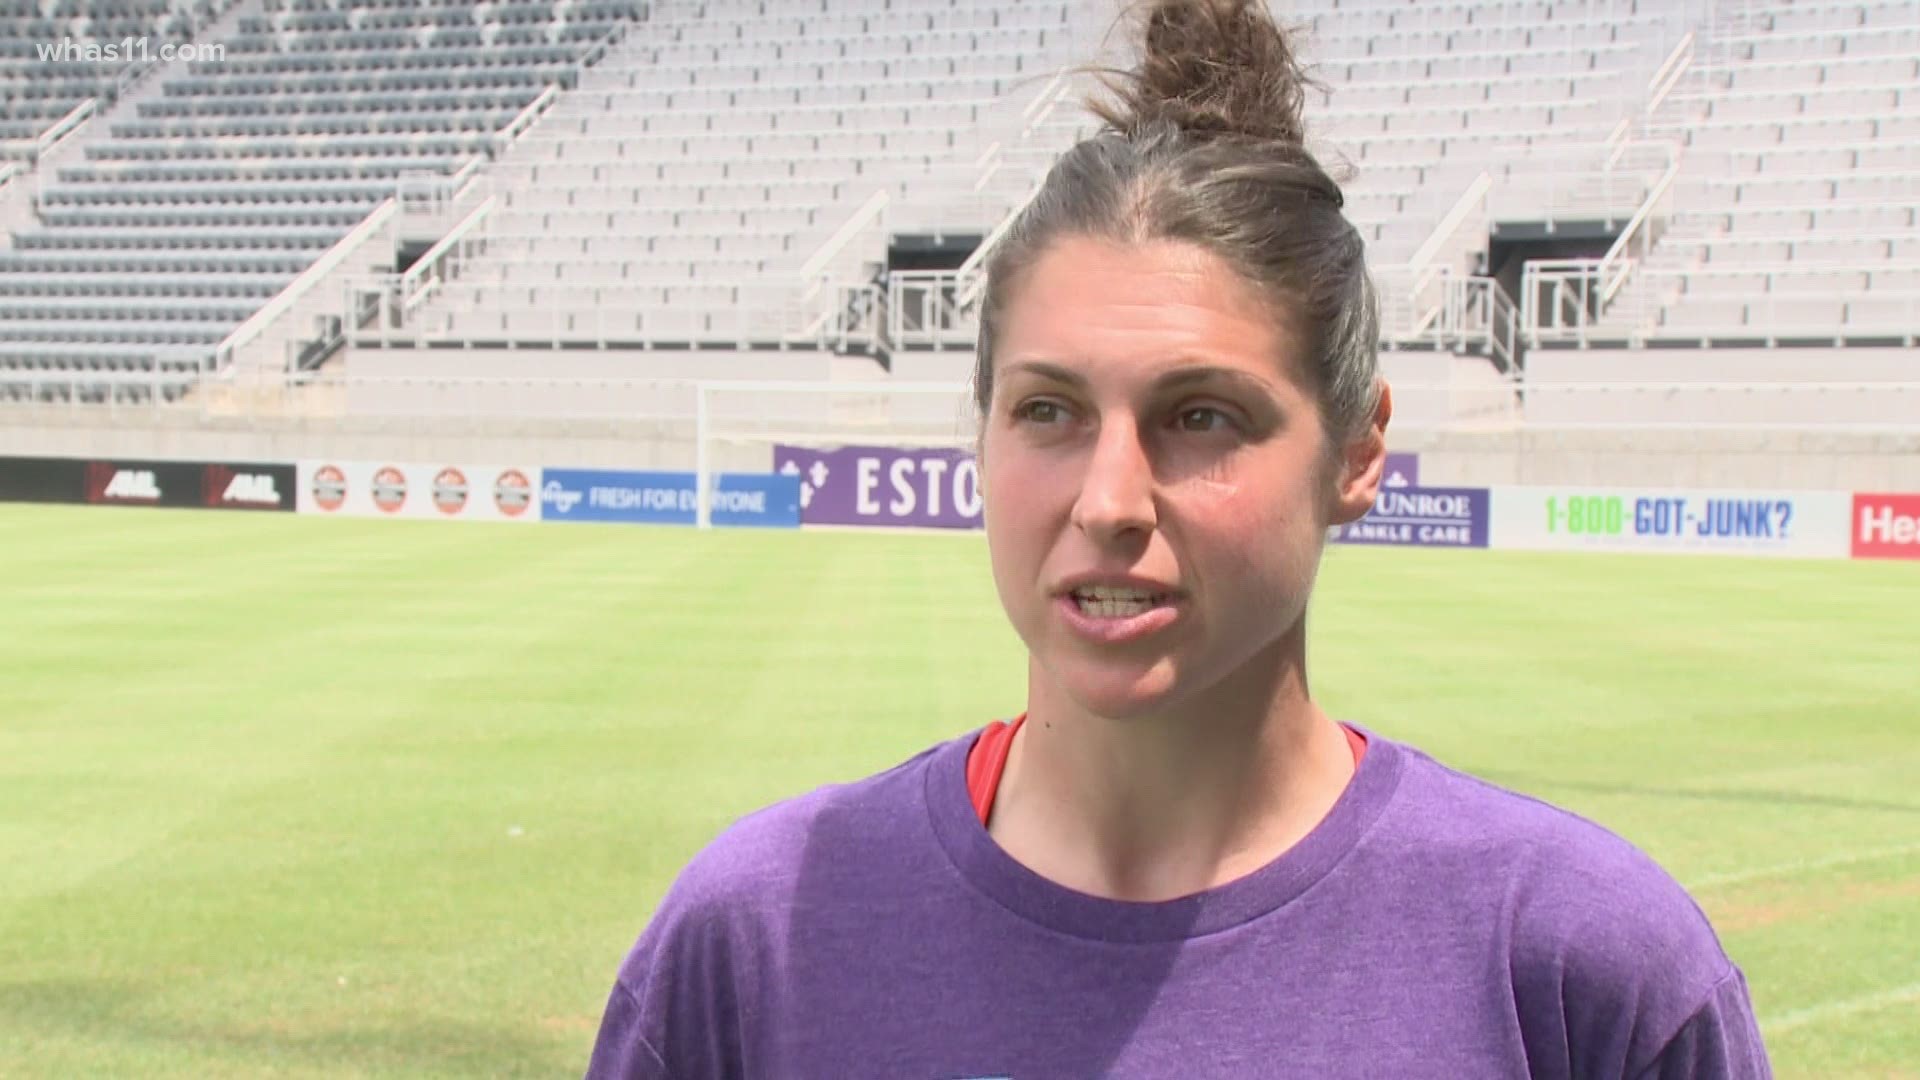 The goalkeeper is the club's captain who has been an NWSL veteran.